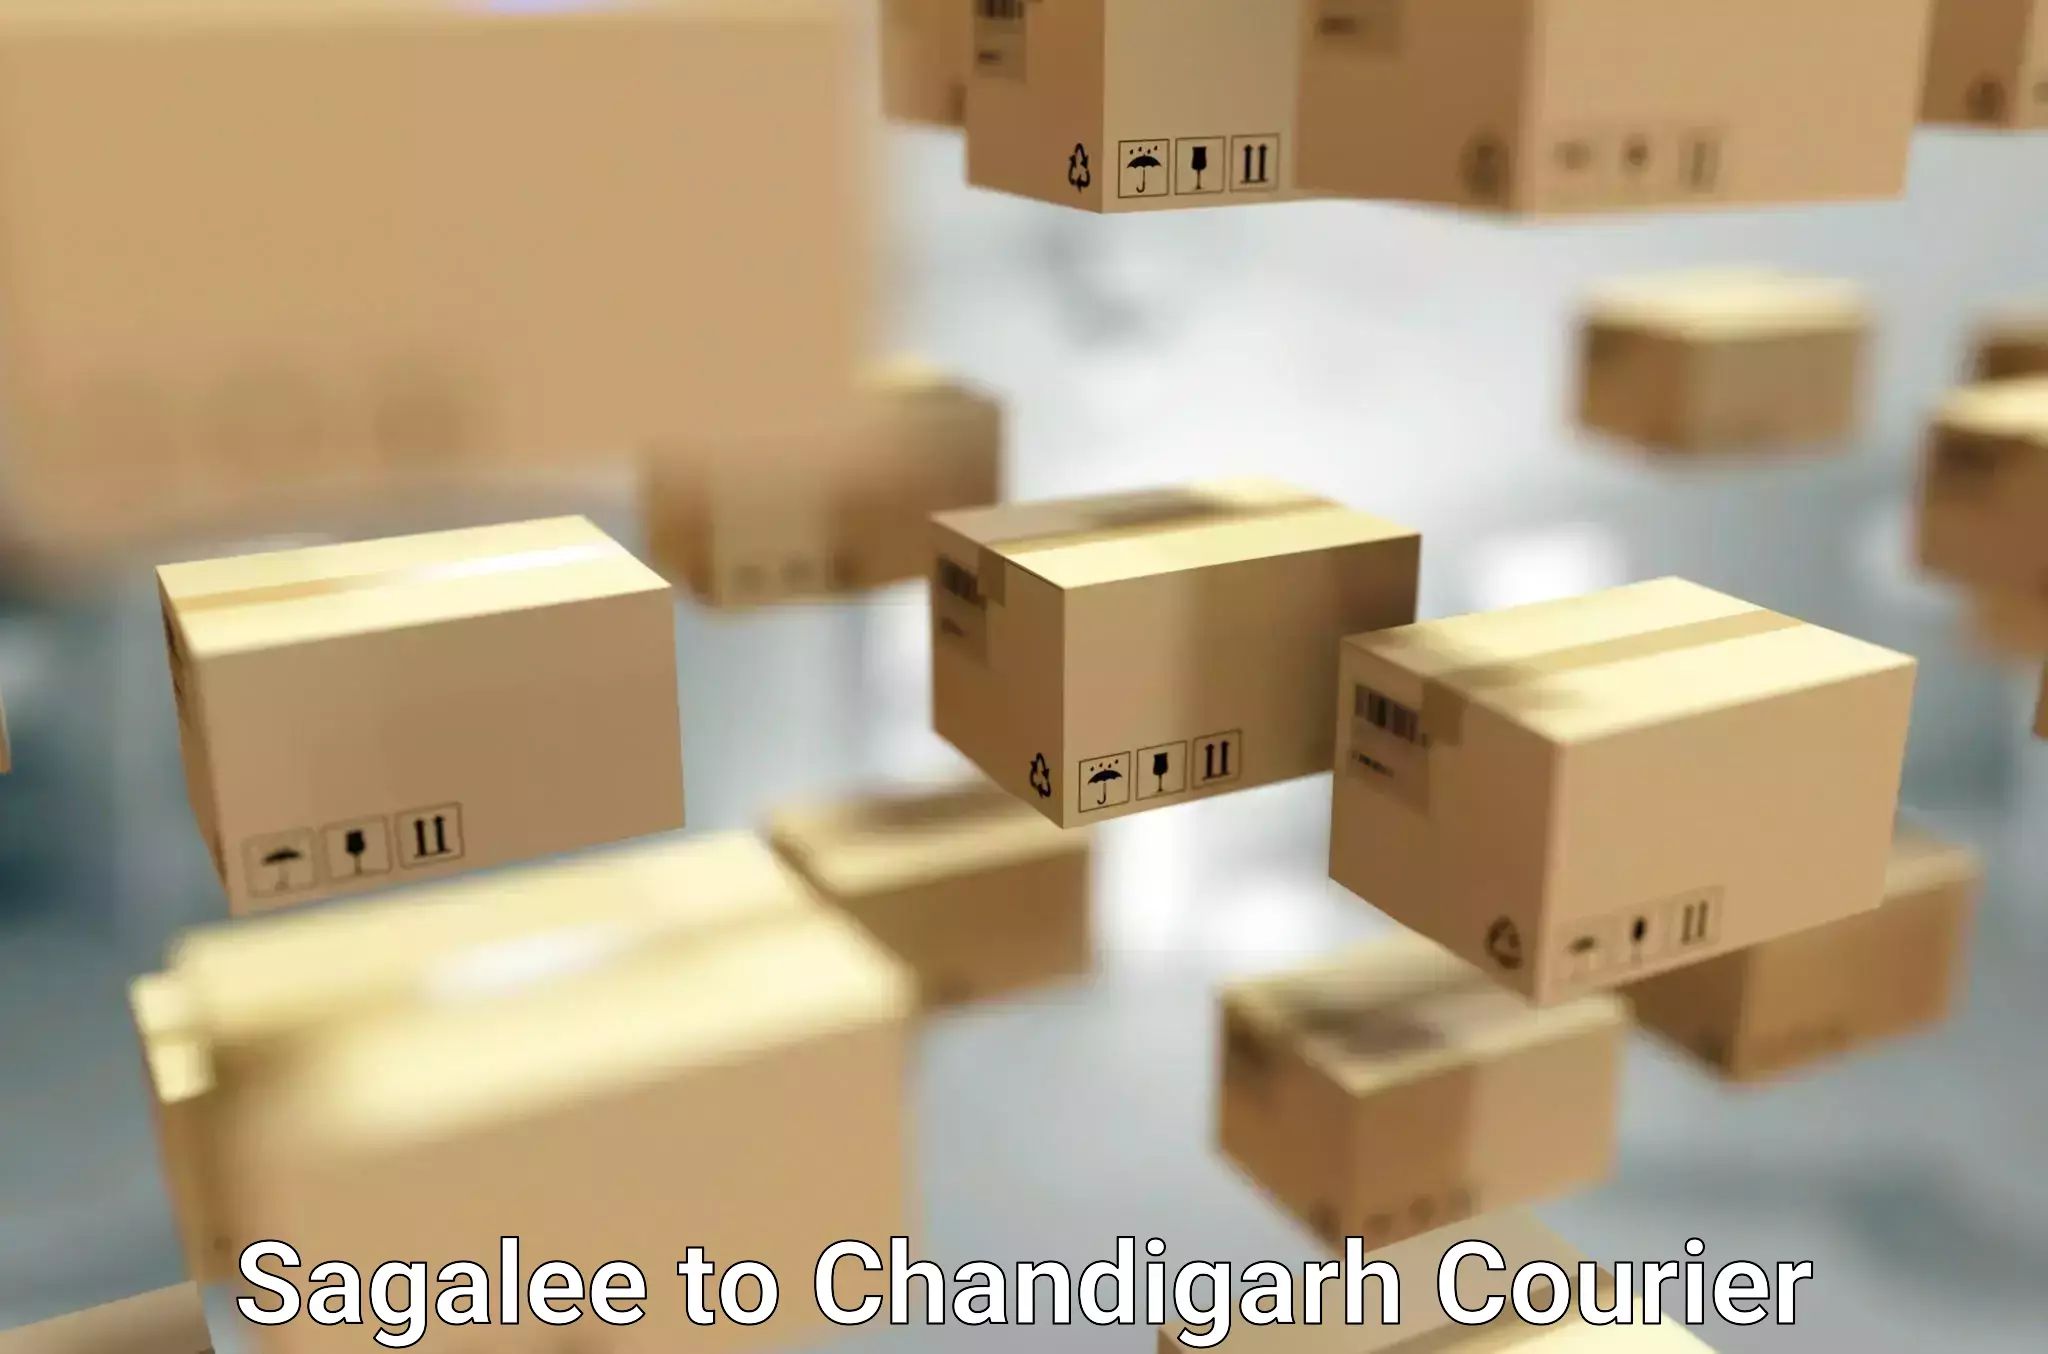 Quality moving company Sagalee to Chandigarh